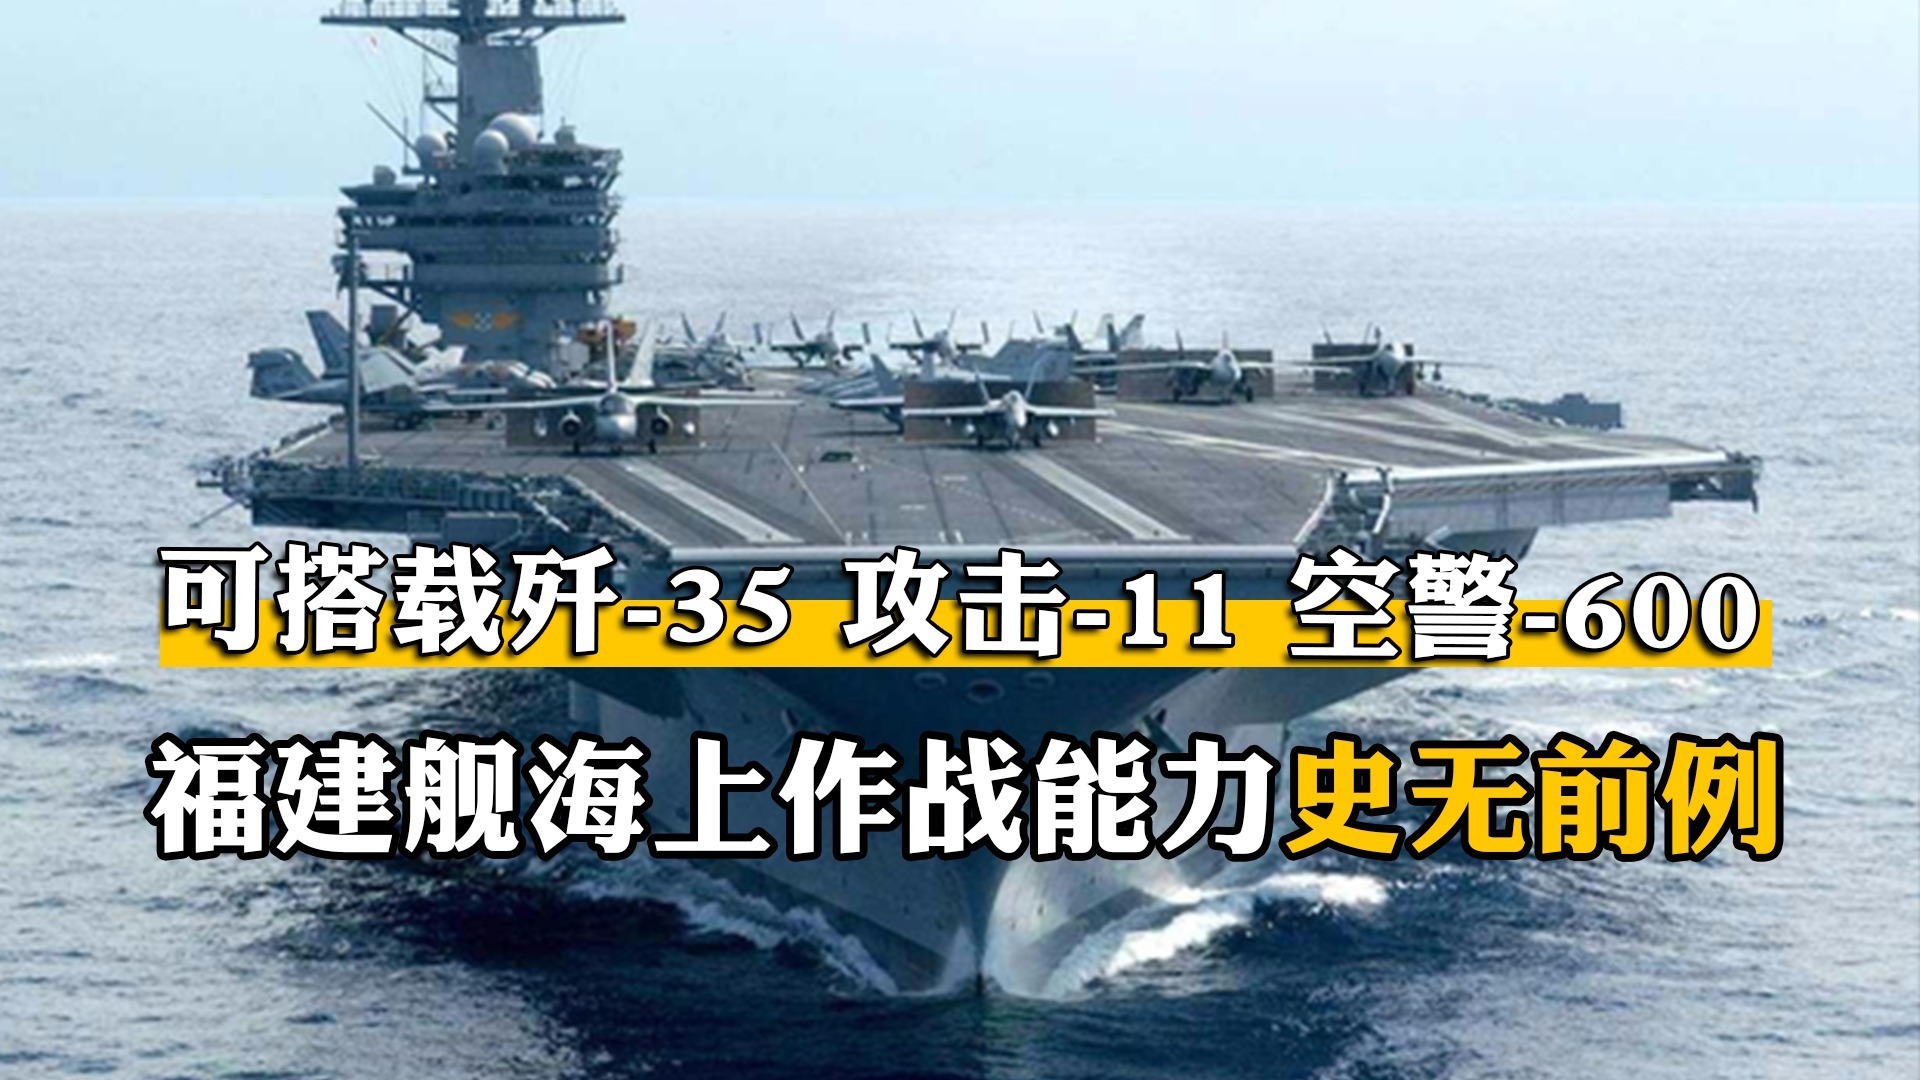 China's new aircraft carrier designed, built independently - China Military